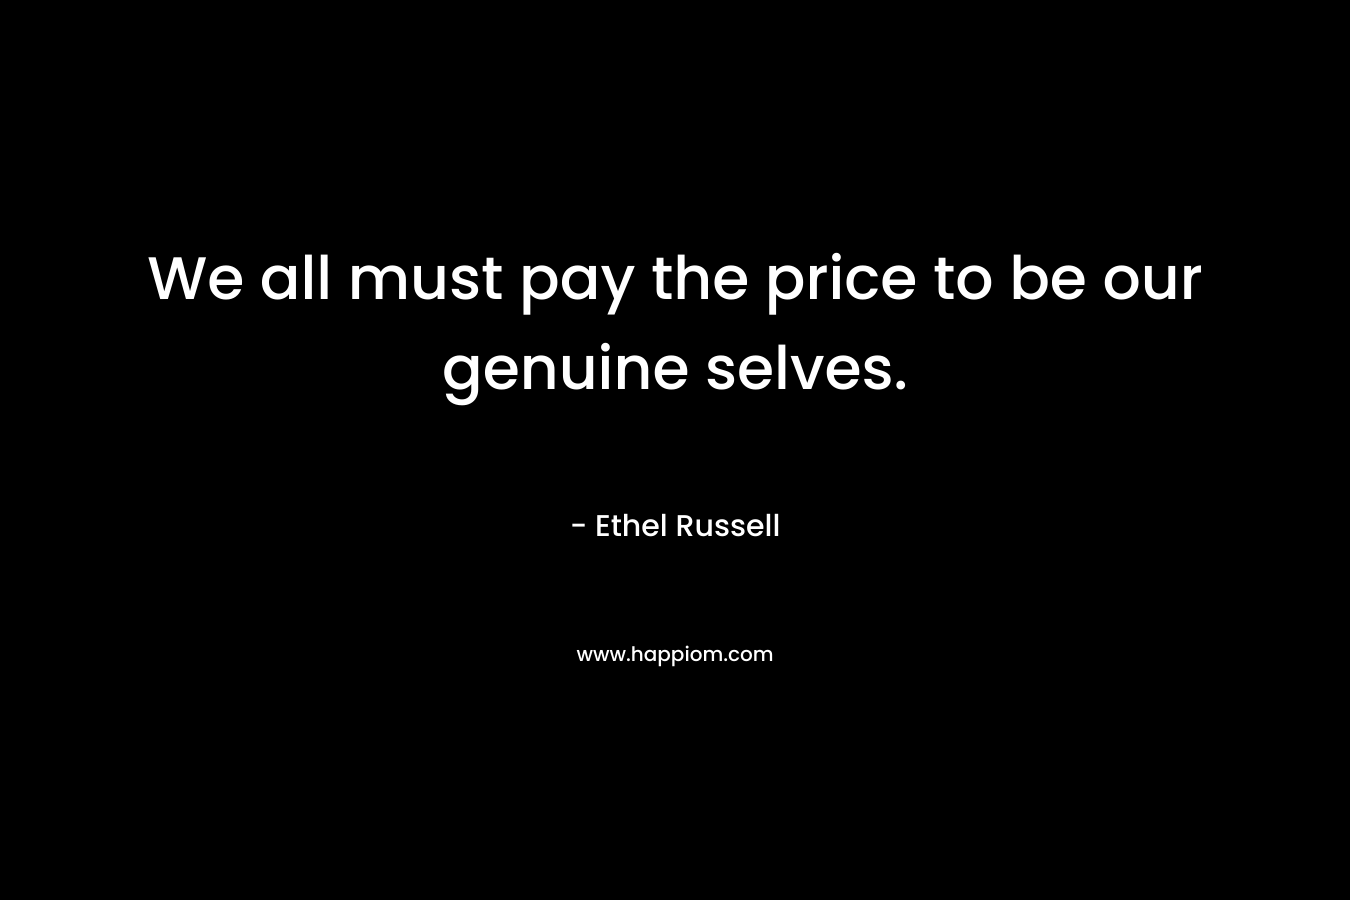 We all must pay the price to be our genuine selves. – Ethel Russell